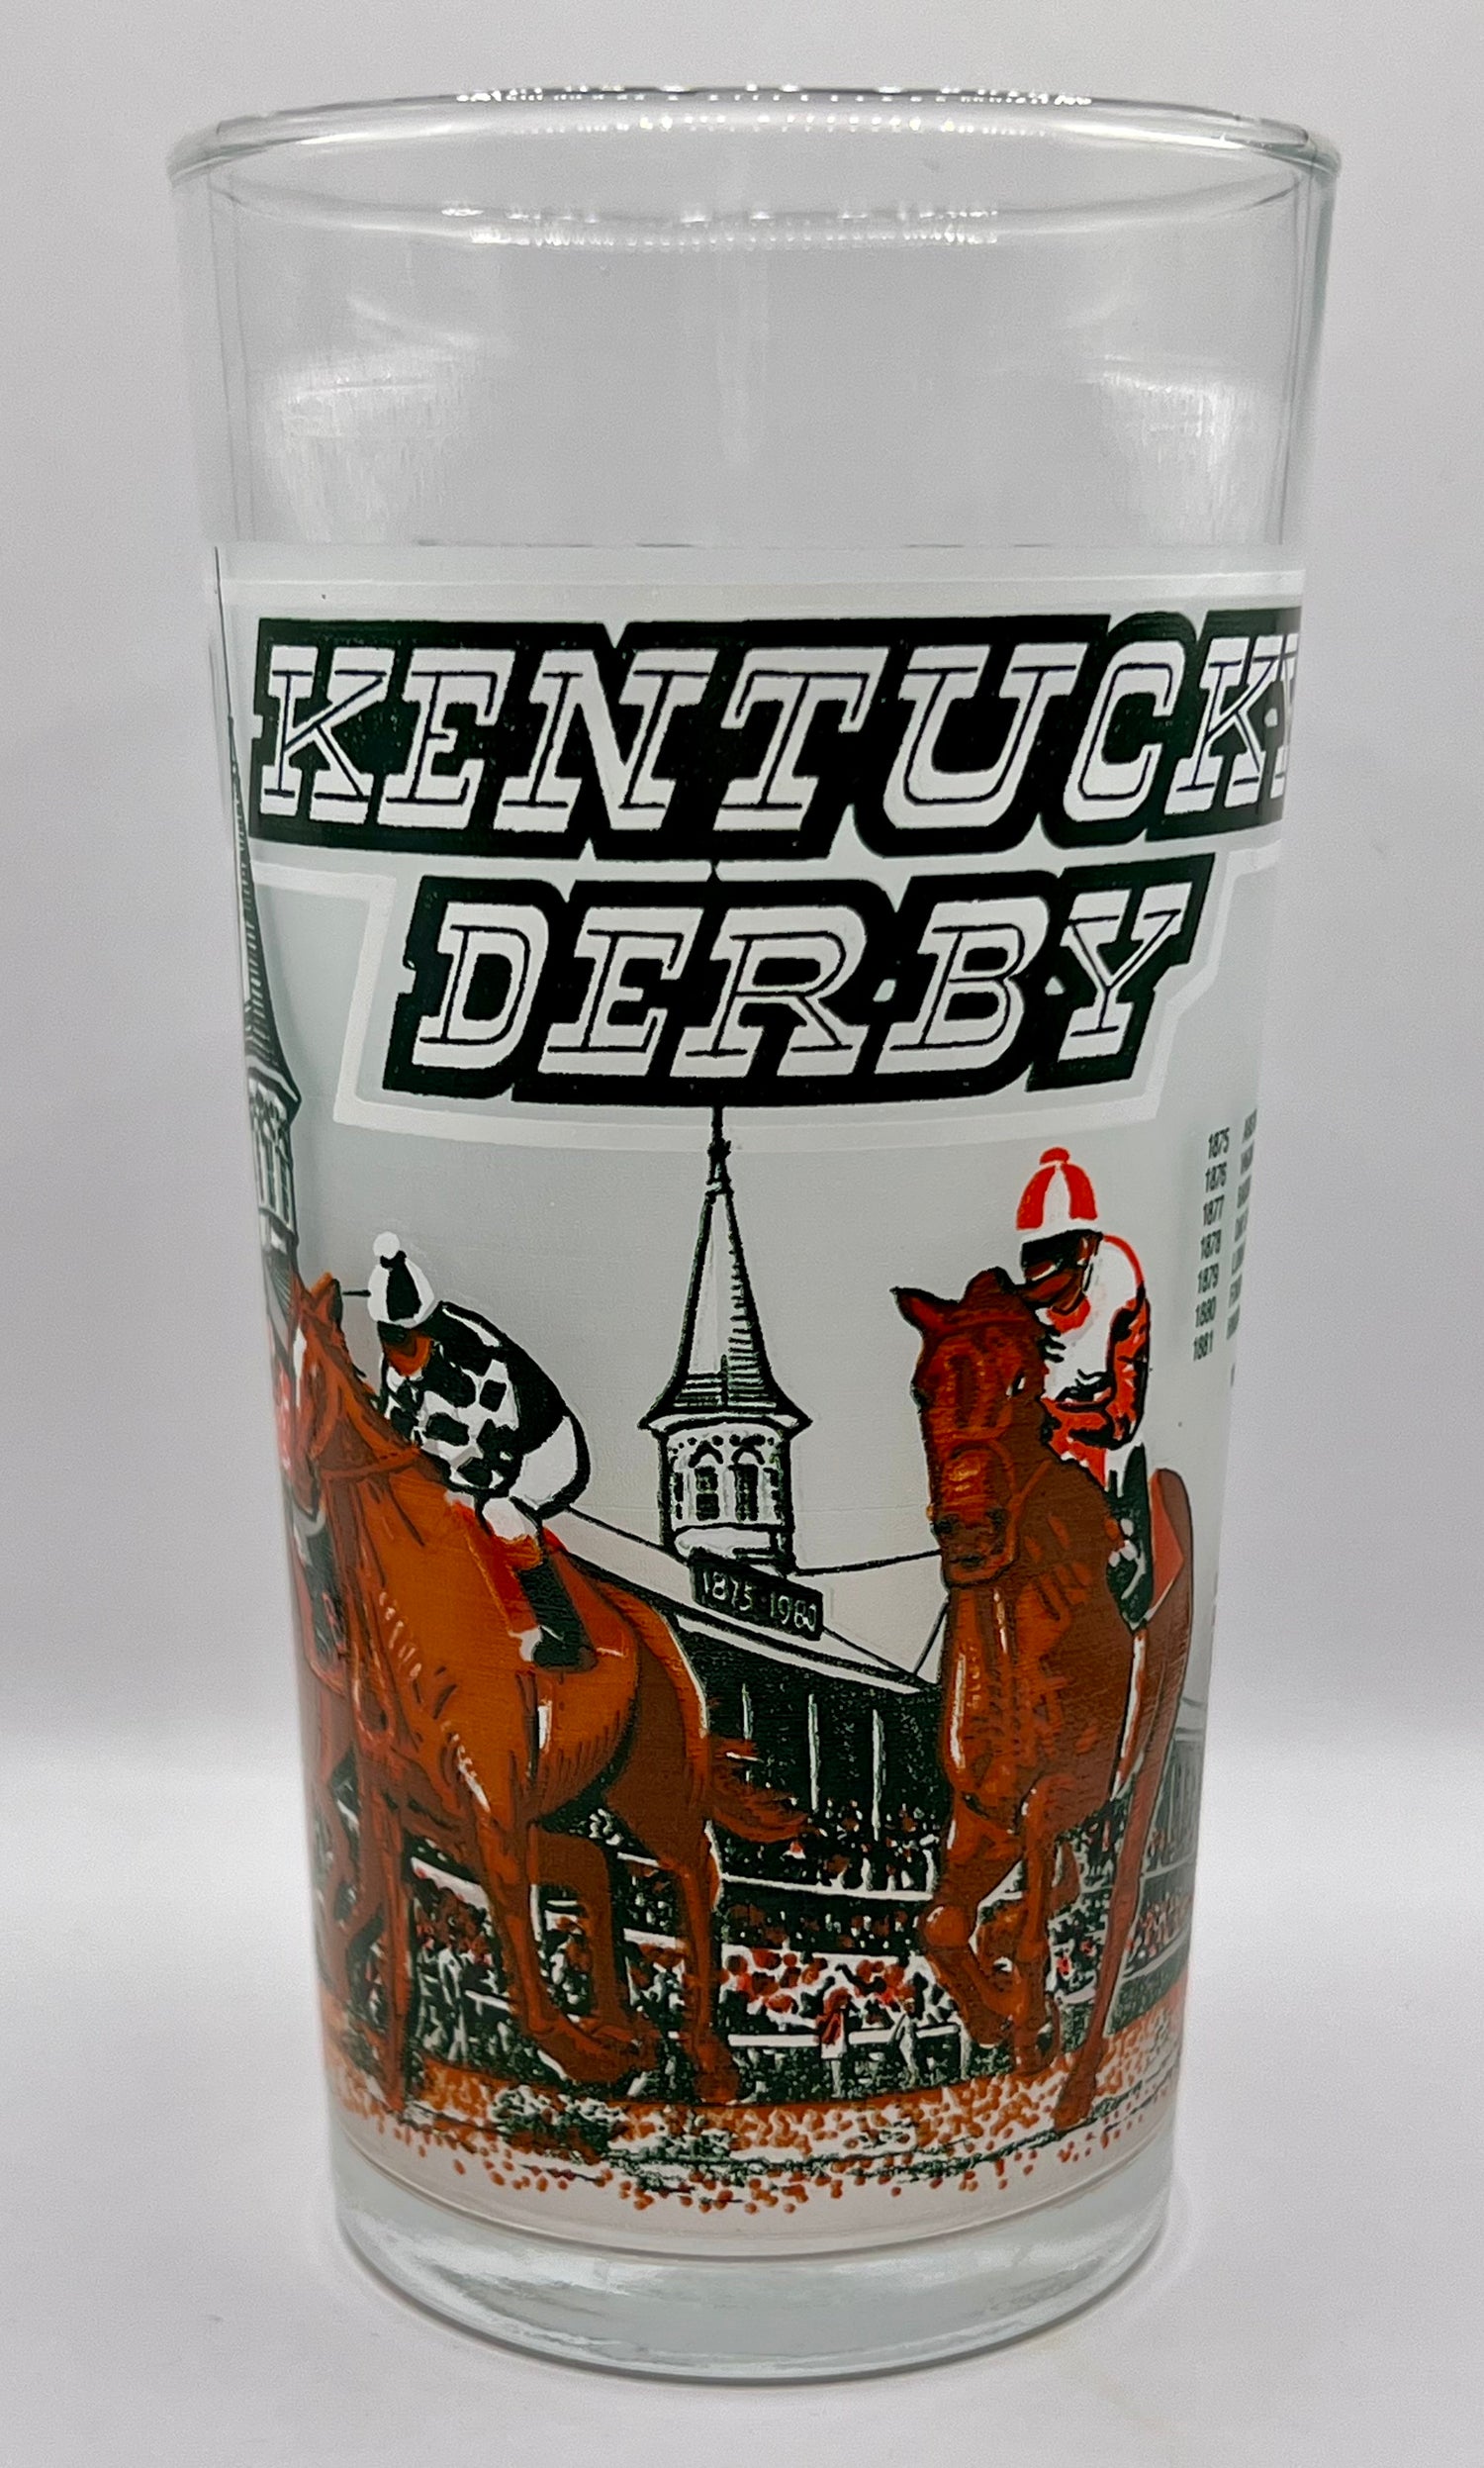 1980 to 1989 Kentucky Derby Glasses